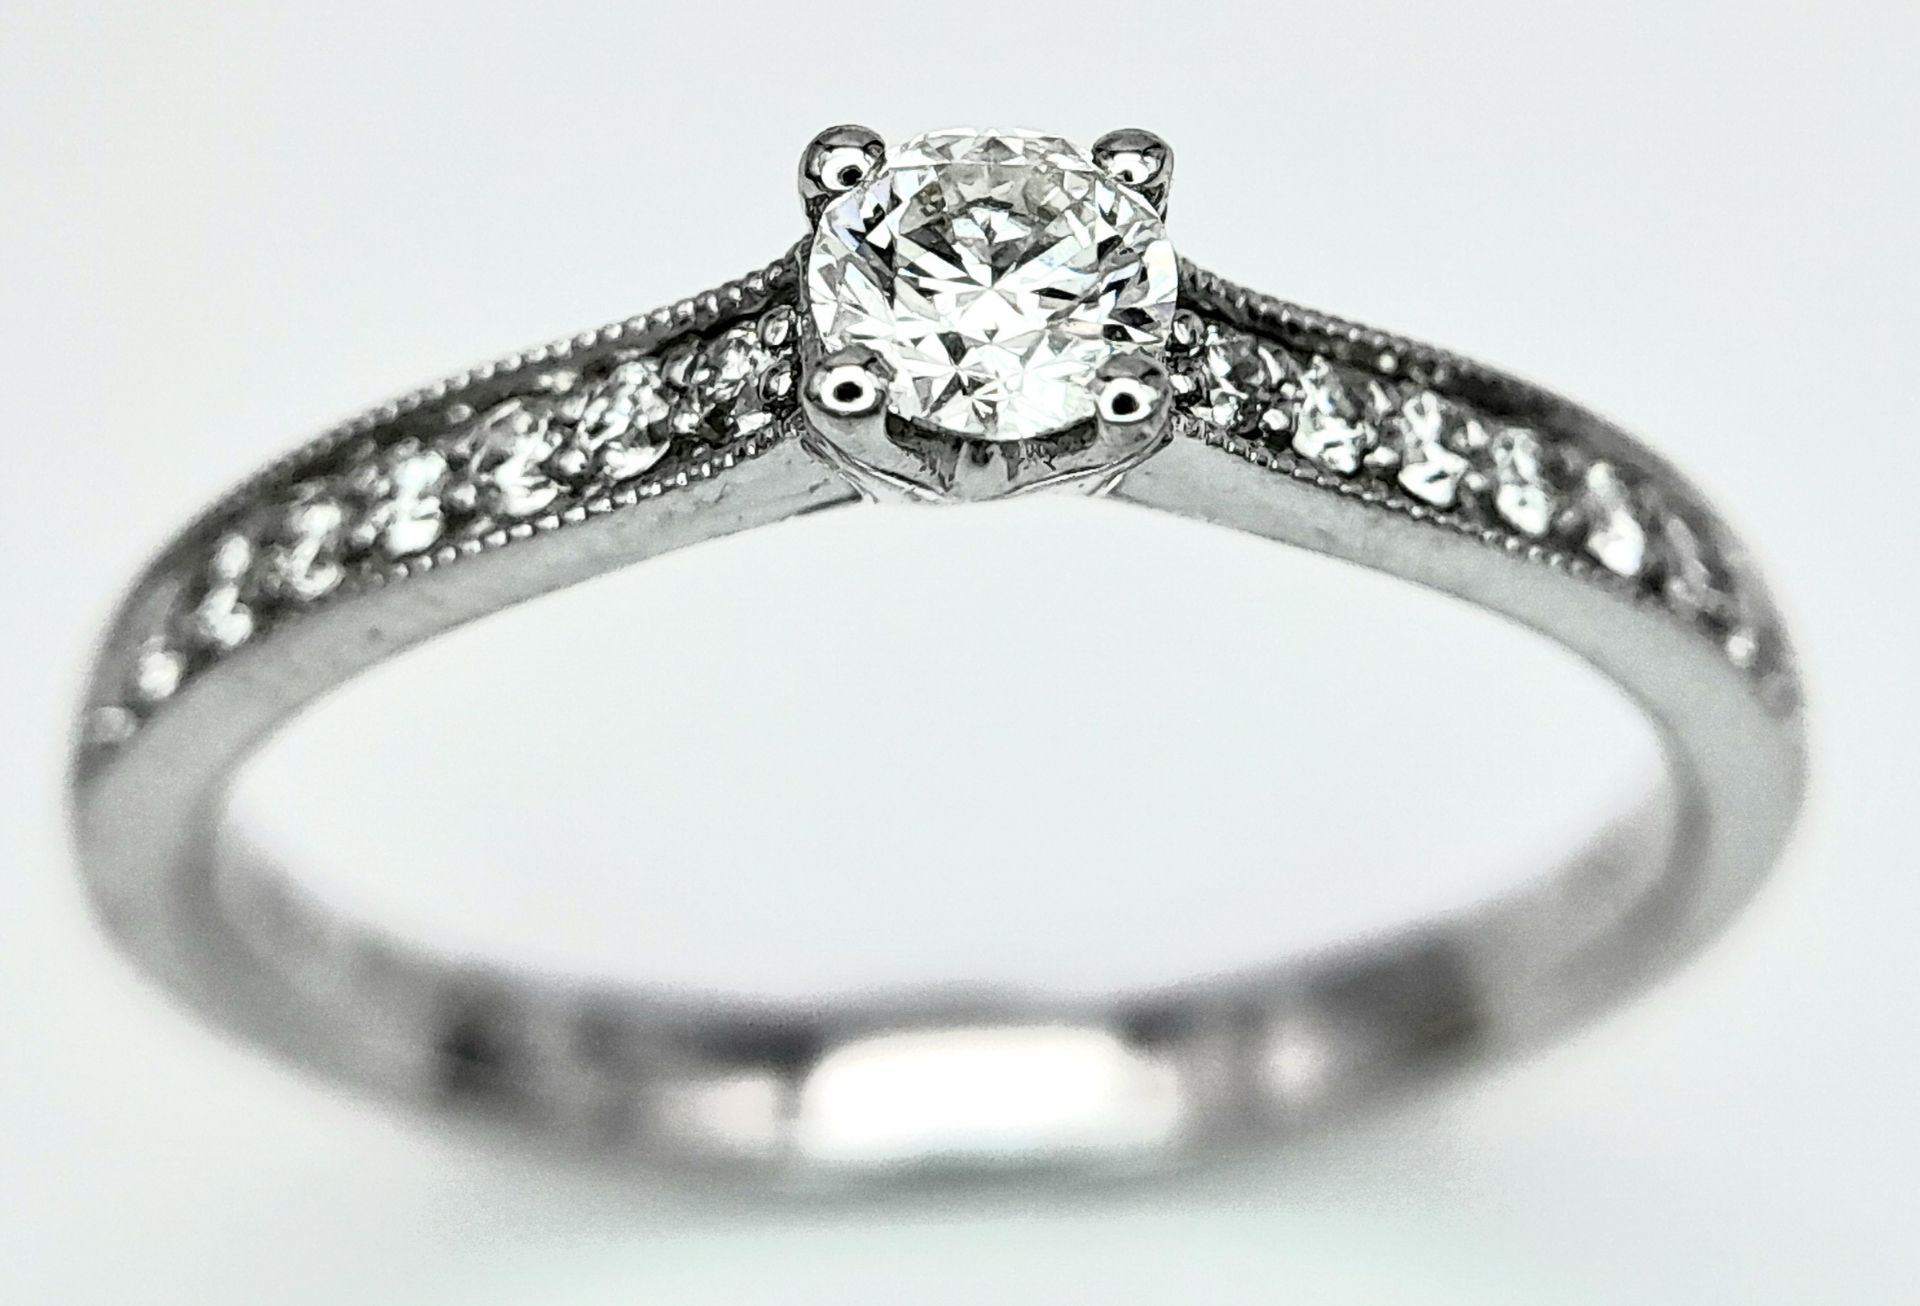 AN 18K WHITE GOLD DIAMOND SOLITAIRE RING - WITH DIAMOND SET SHOULDERS. 0.35CT. TOTAL 2.6G. SIZE N - Image 2 of 5